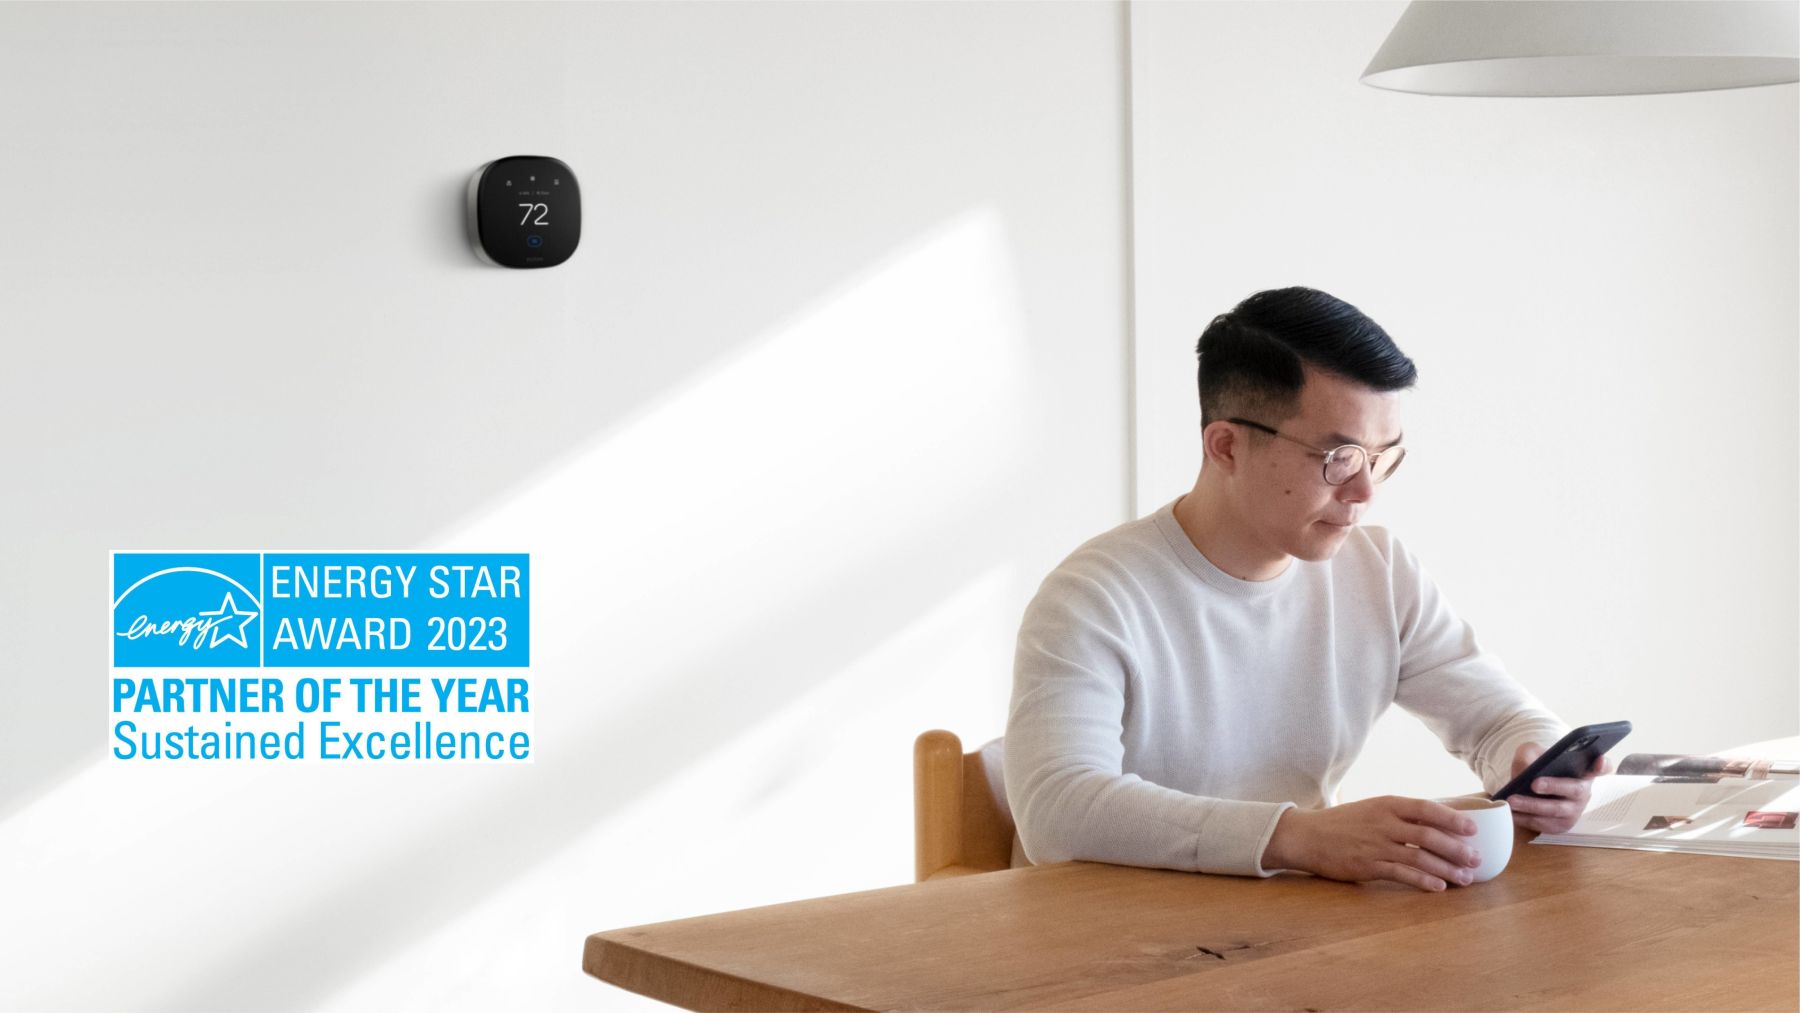 Man sitting at a table with an ecobee Smart Thermostat Premium on the wall behind him. ENERGY STAR Partner of the Year logo in the bottom corner.